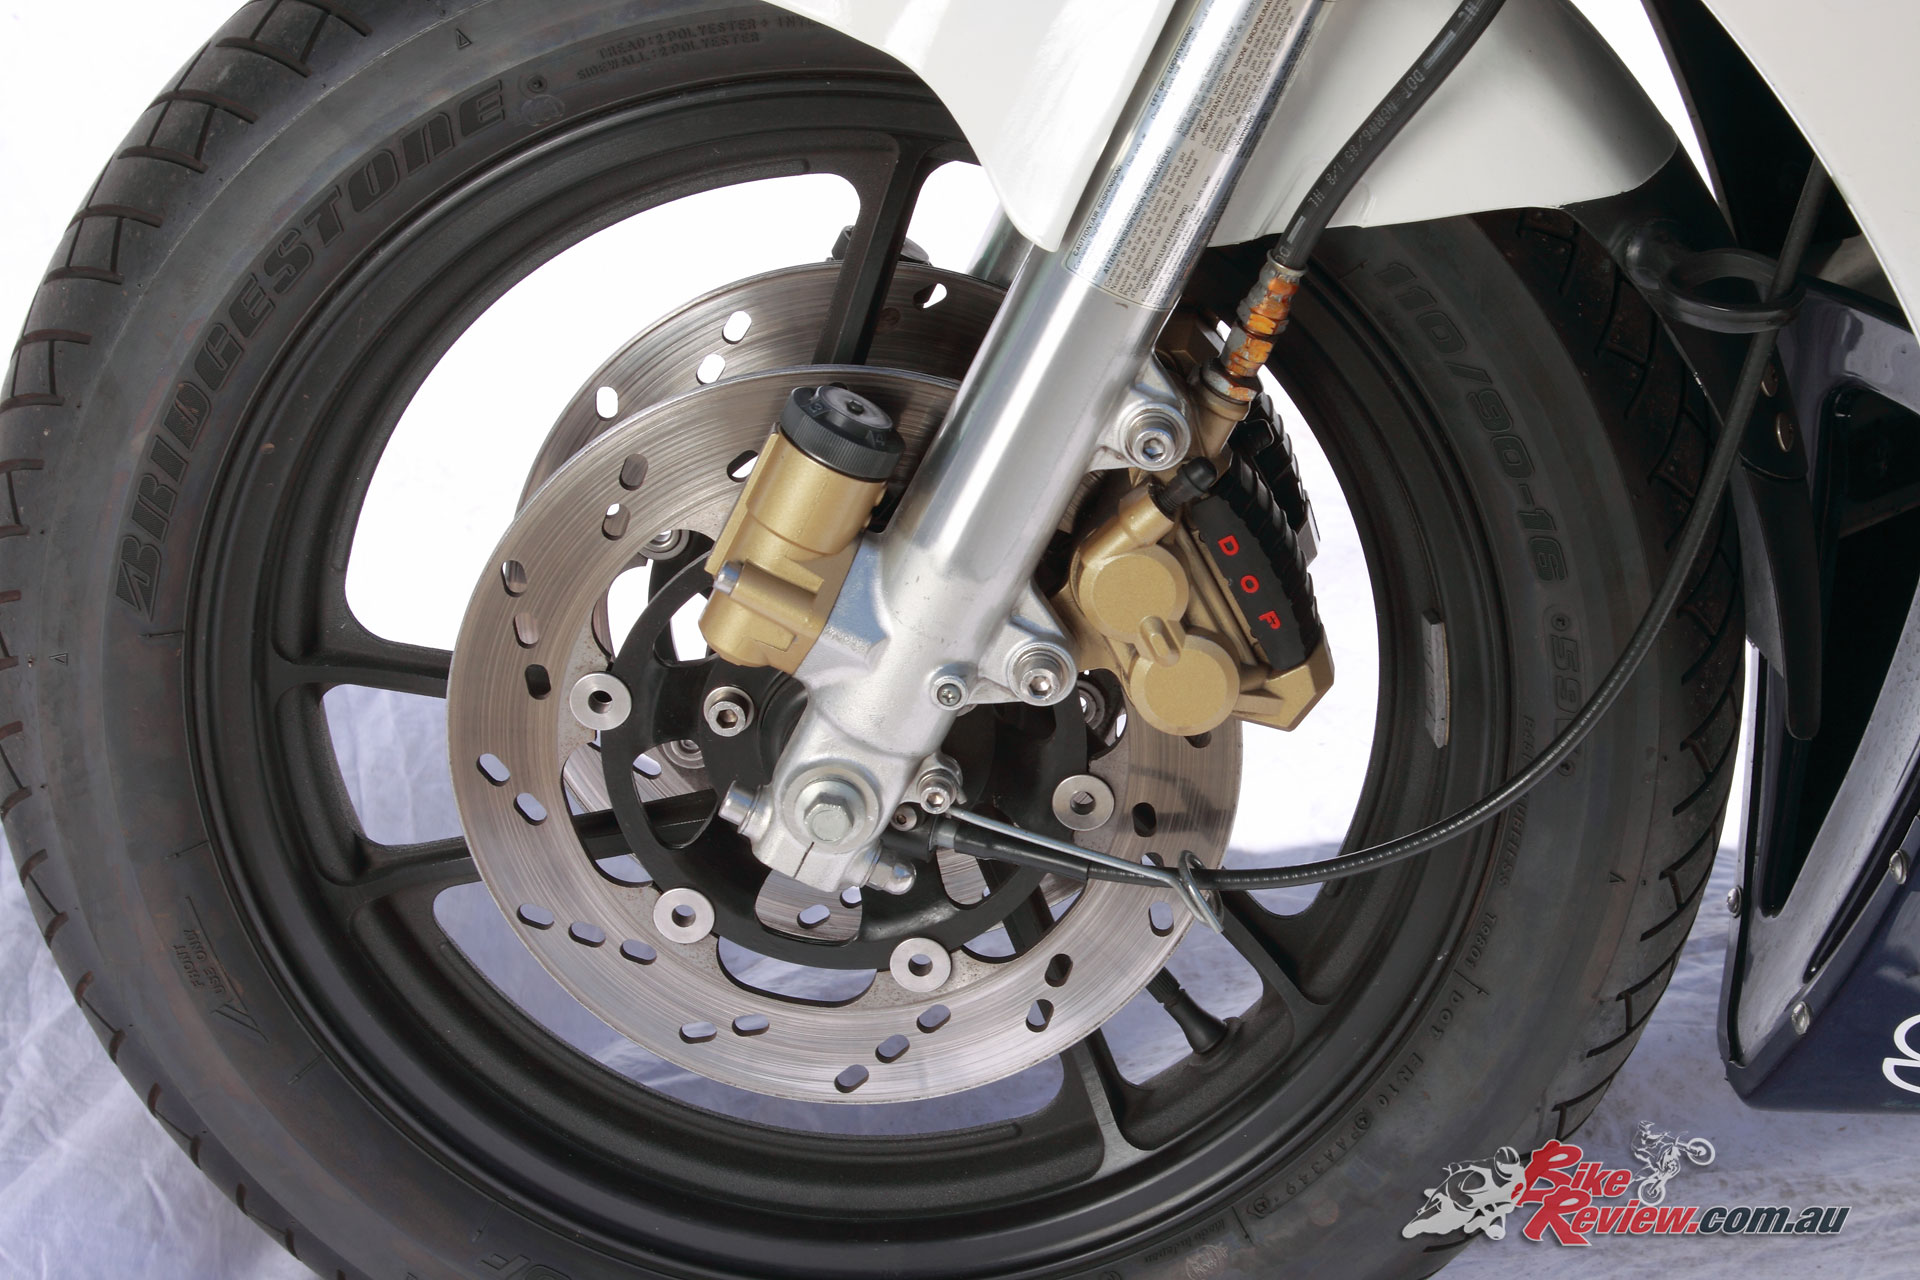 Dual front disc brakes helped slow the RG500 from it's 225km/h+ top speed, with 95hp on hand